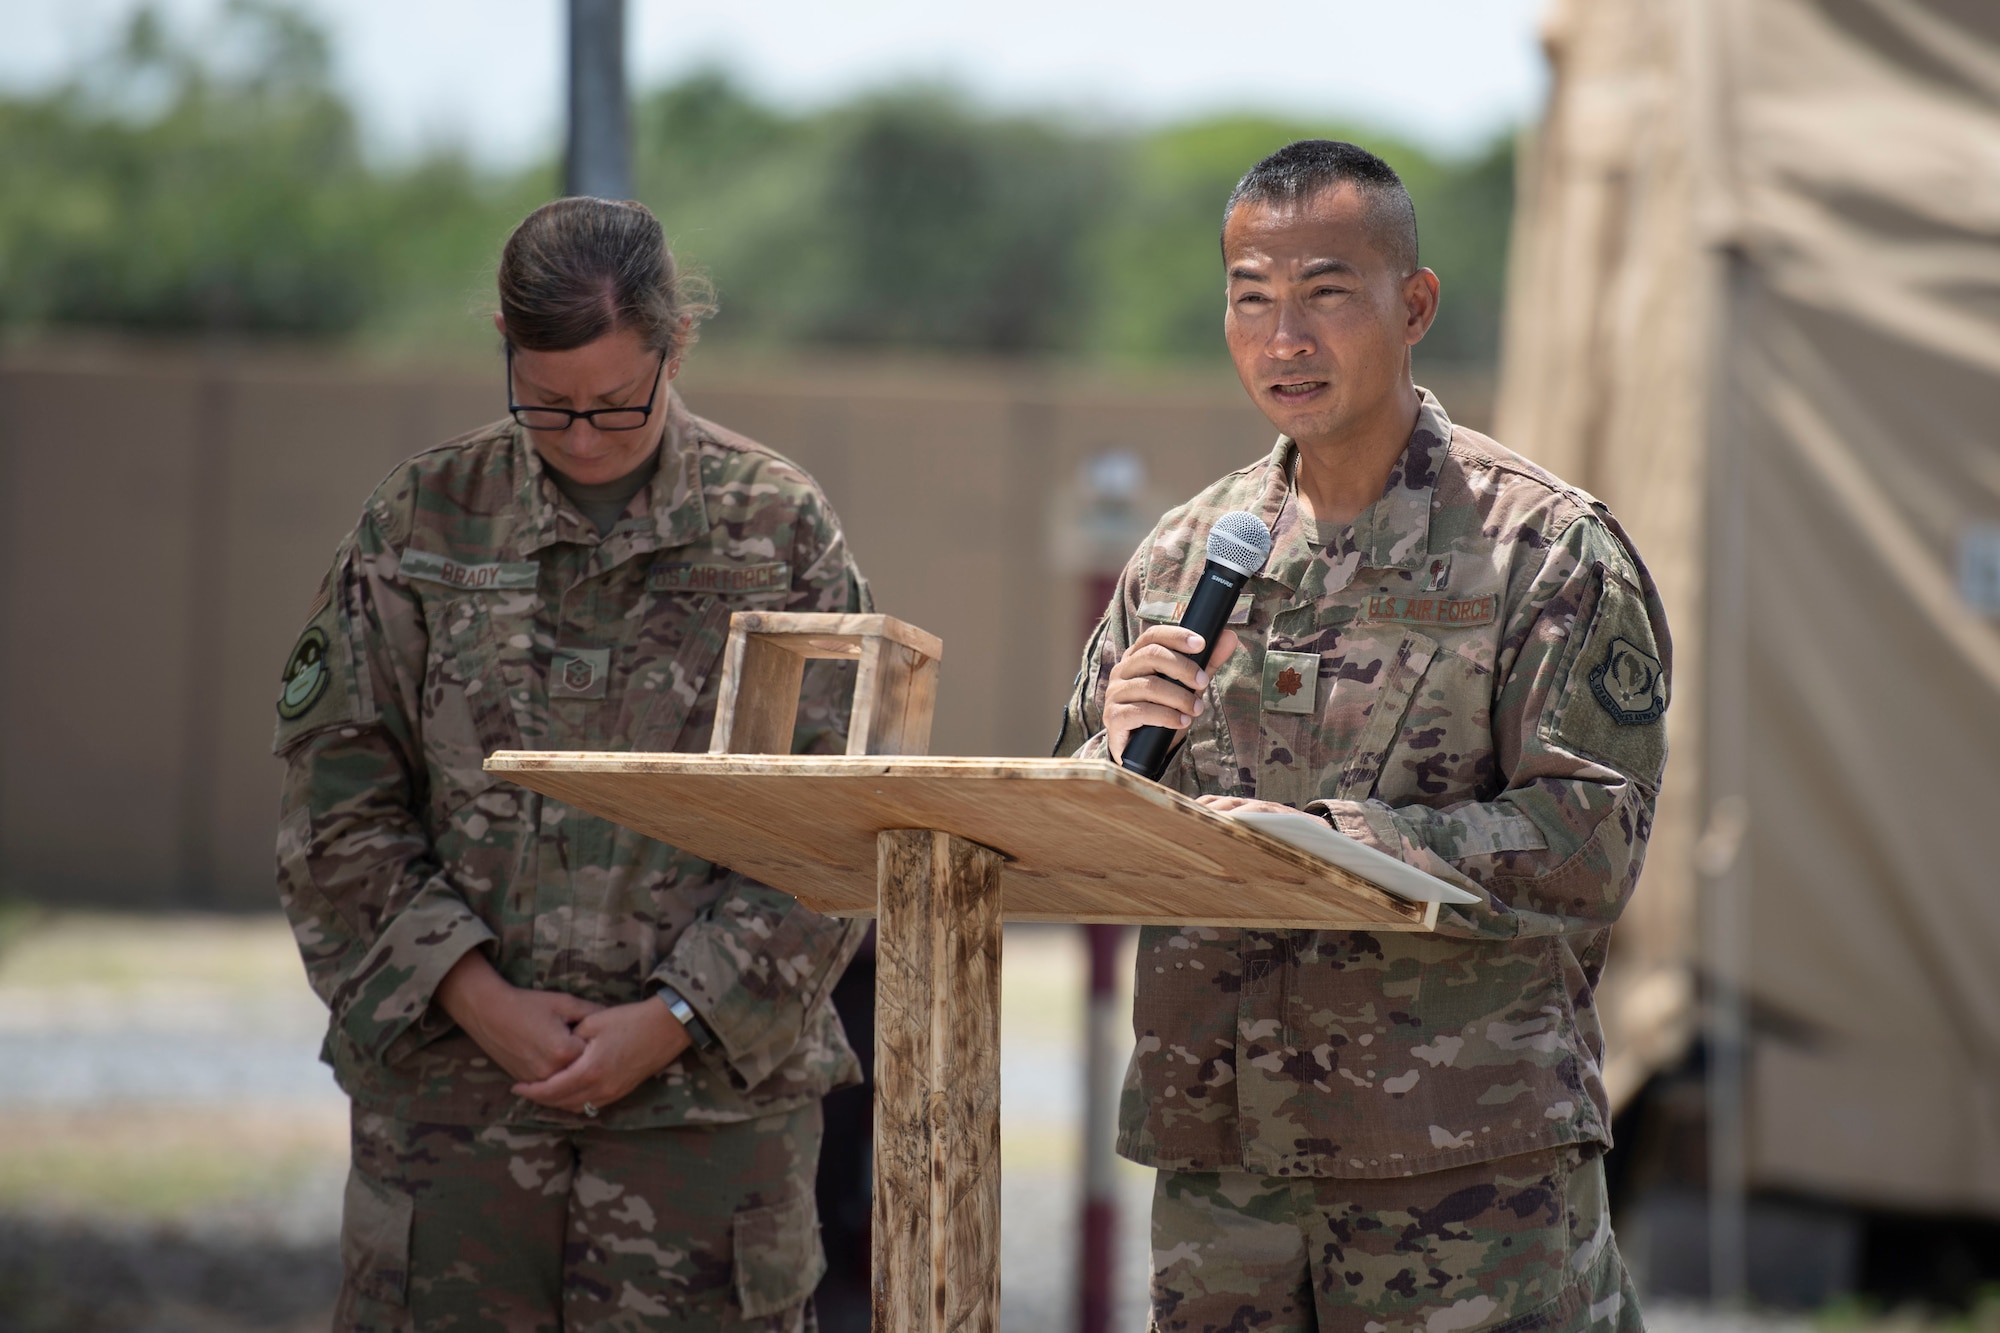 U.S. Air Force Maj. Hoang Nguyen, 435th Air Expeditionary Wing chaplain, gives an invocation while Master Sgt. Shannon Brady, 475th Expeditionary Air Base Squadron first sergeant, bows her head during a flag-raising ceremony at Camp Simba, Kenya, Aug. 26, 2019. The 475th EABS raised the flag for the first time since the base operating support-integrator mission started in 2017, signifying the change from tactical to enduring operations. (U.S. Air Force photo by Staff Sgt. Lexie West)